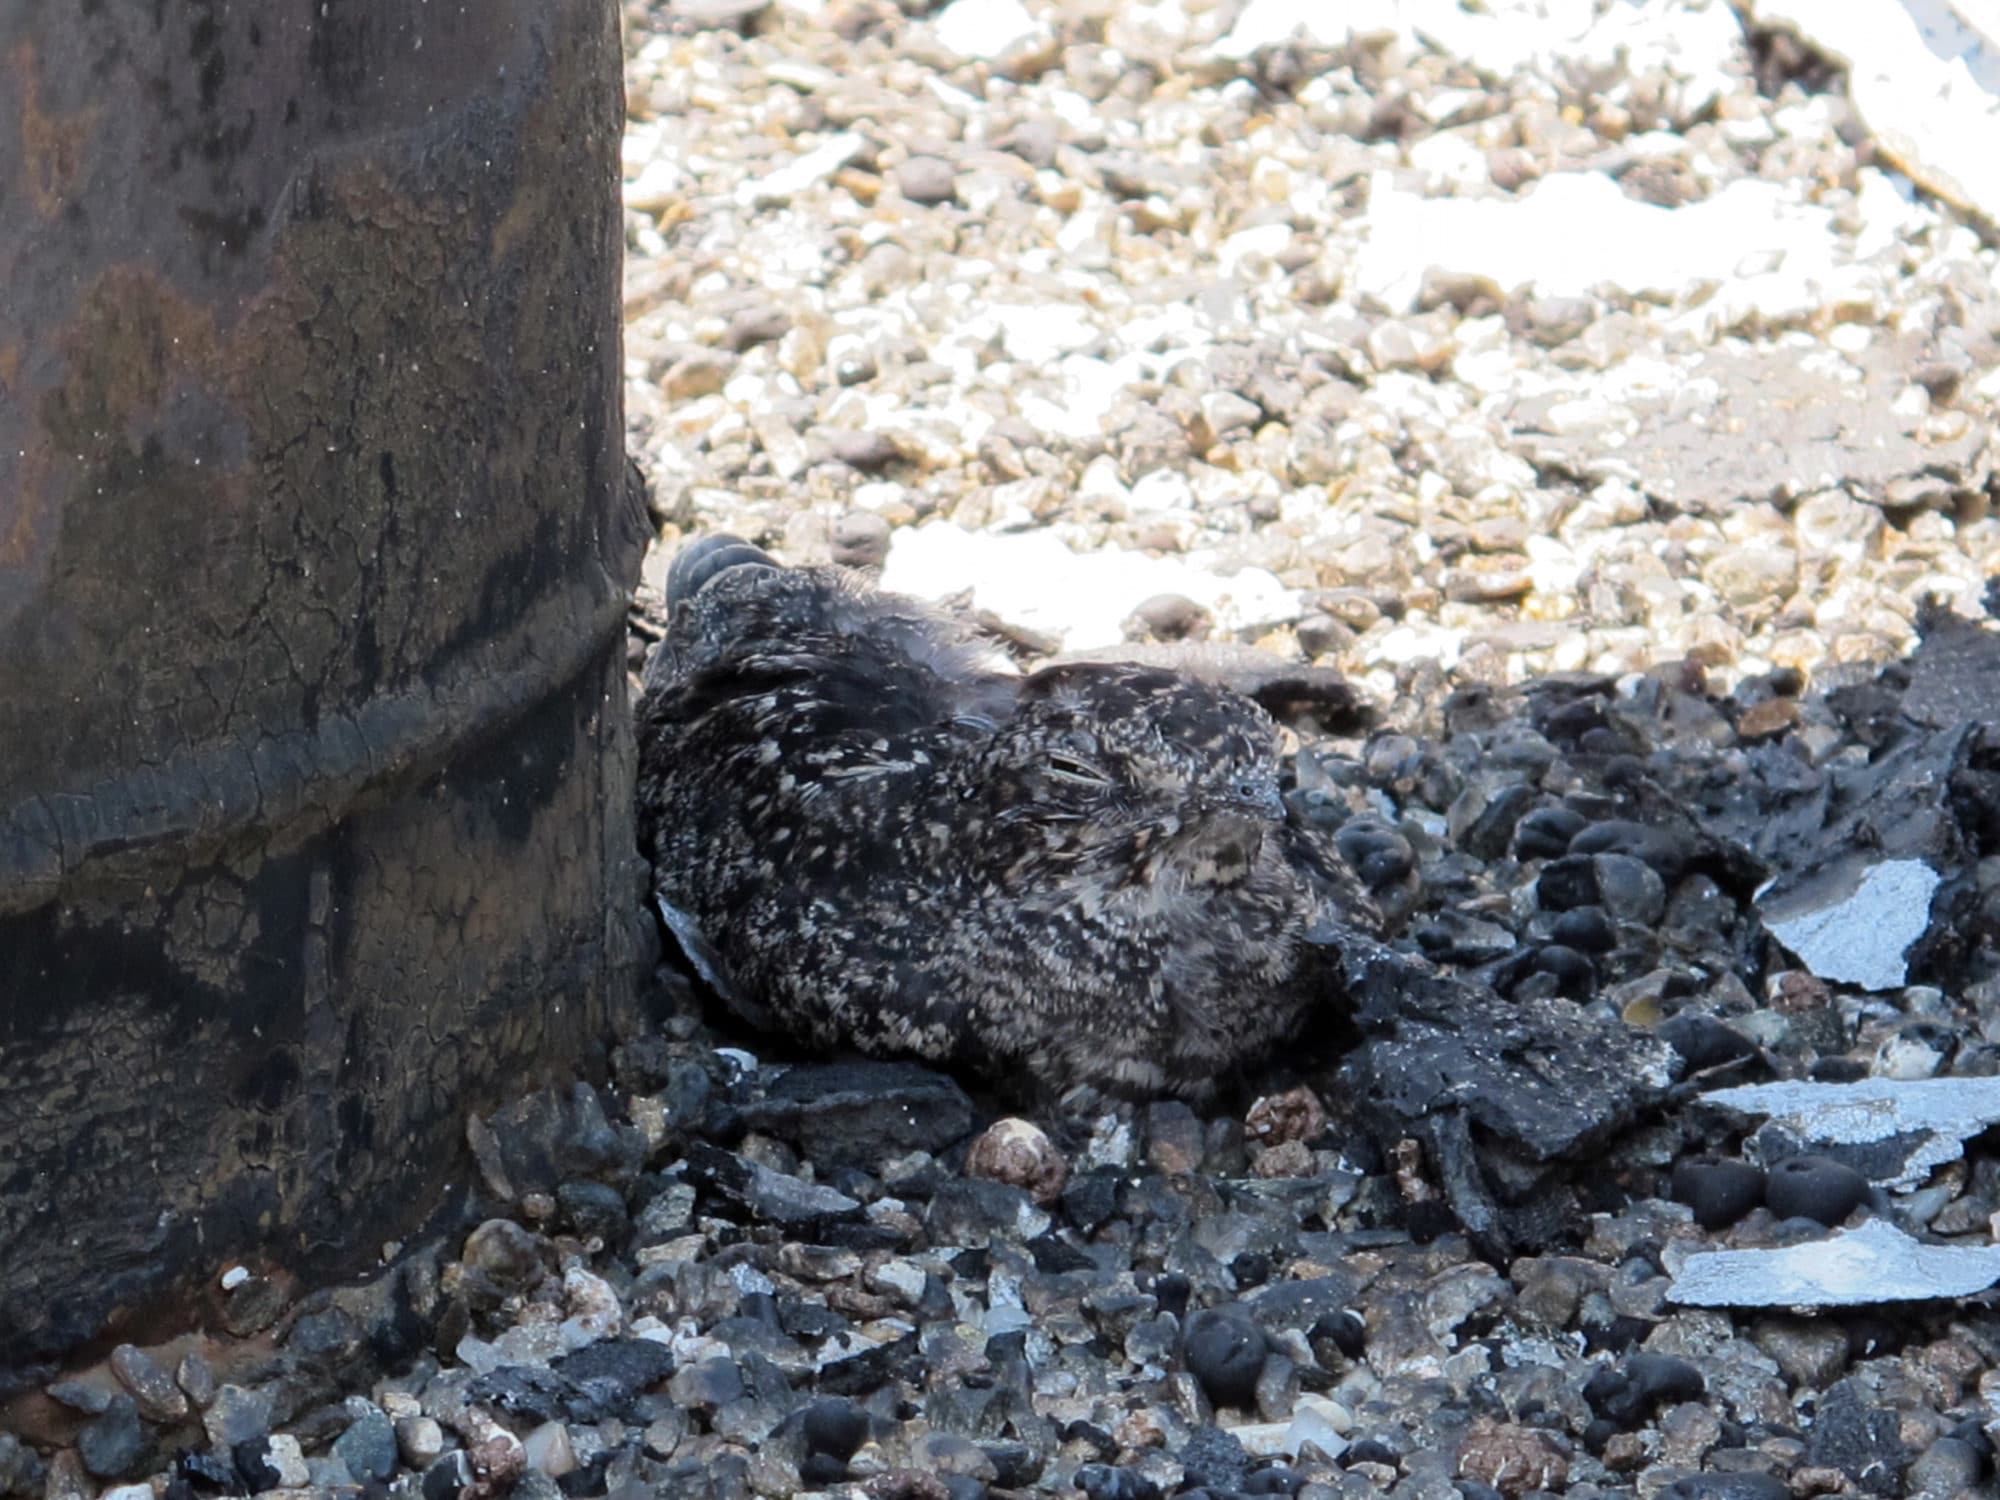 A nighthawk chick rests in the shade on a rooftop in downtown Keene. (photo © Brett Amy Thelen)